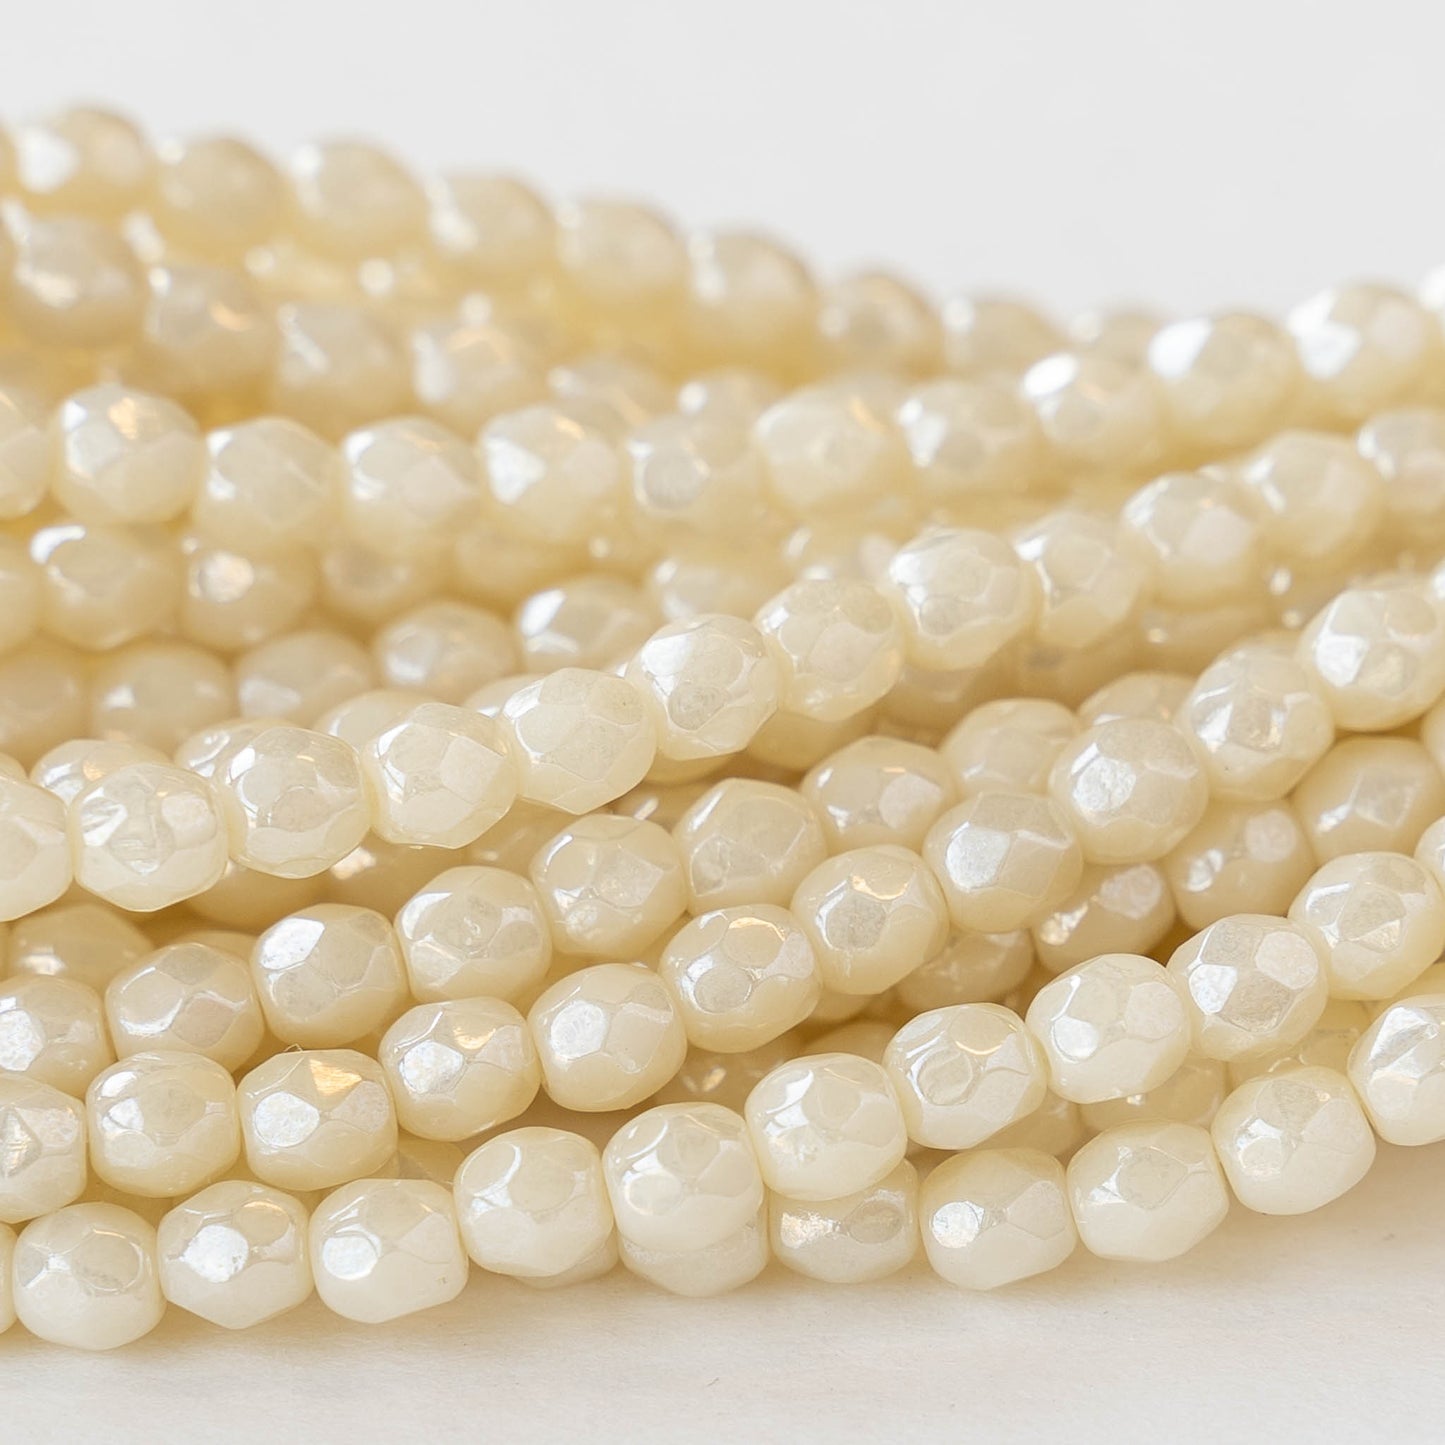 4mm Round Firepolished Beads - Ivory Luster- 50 Beads